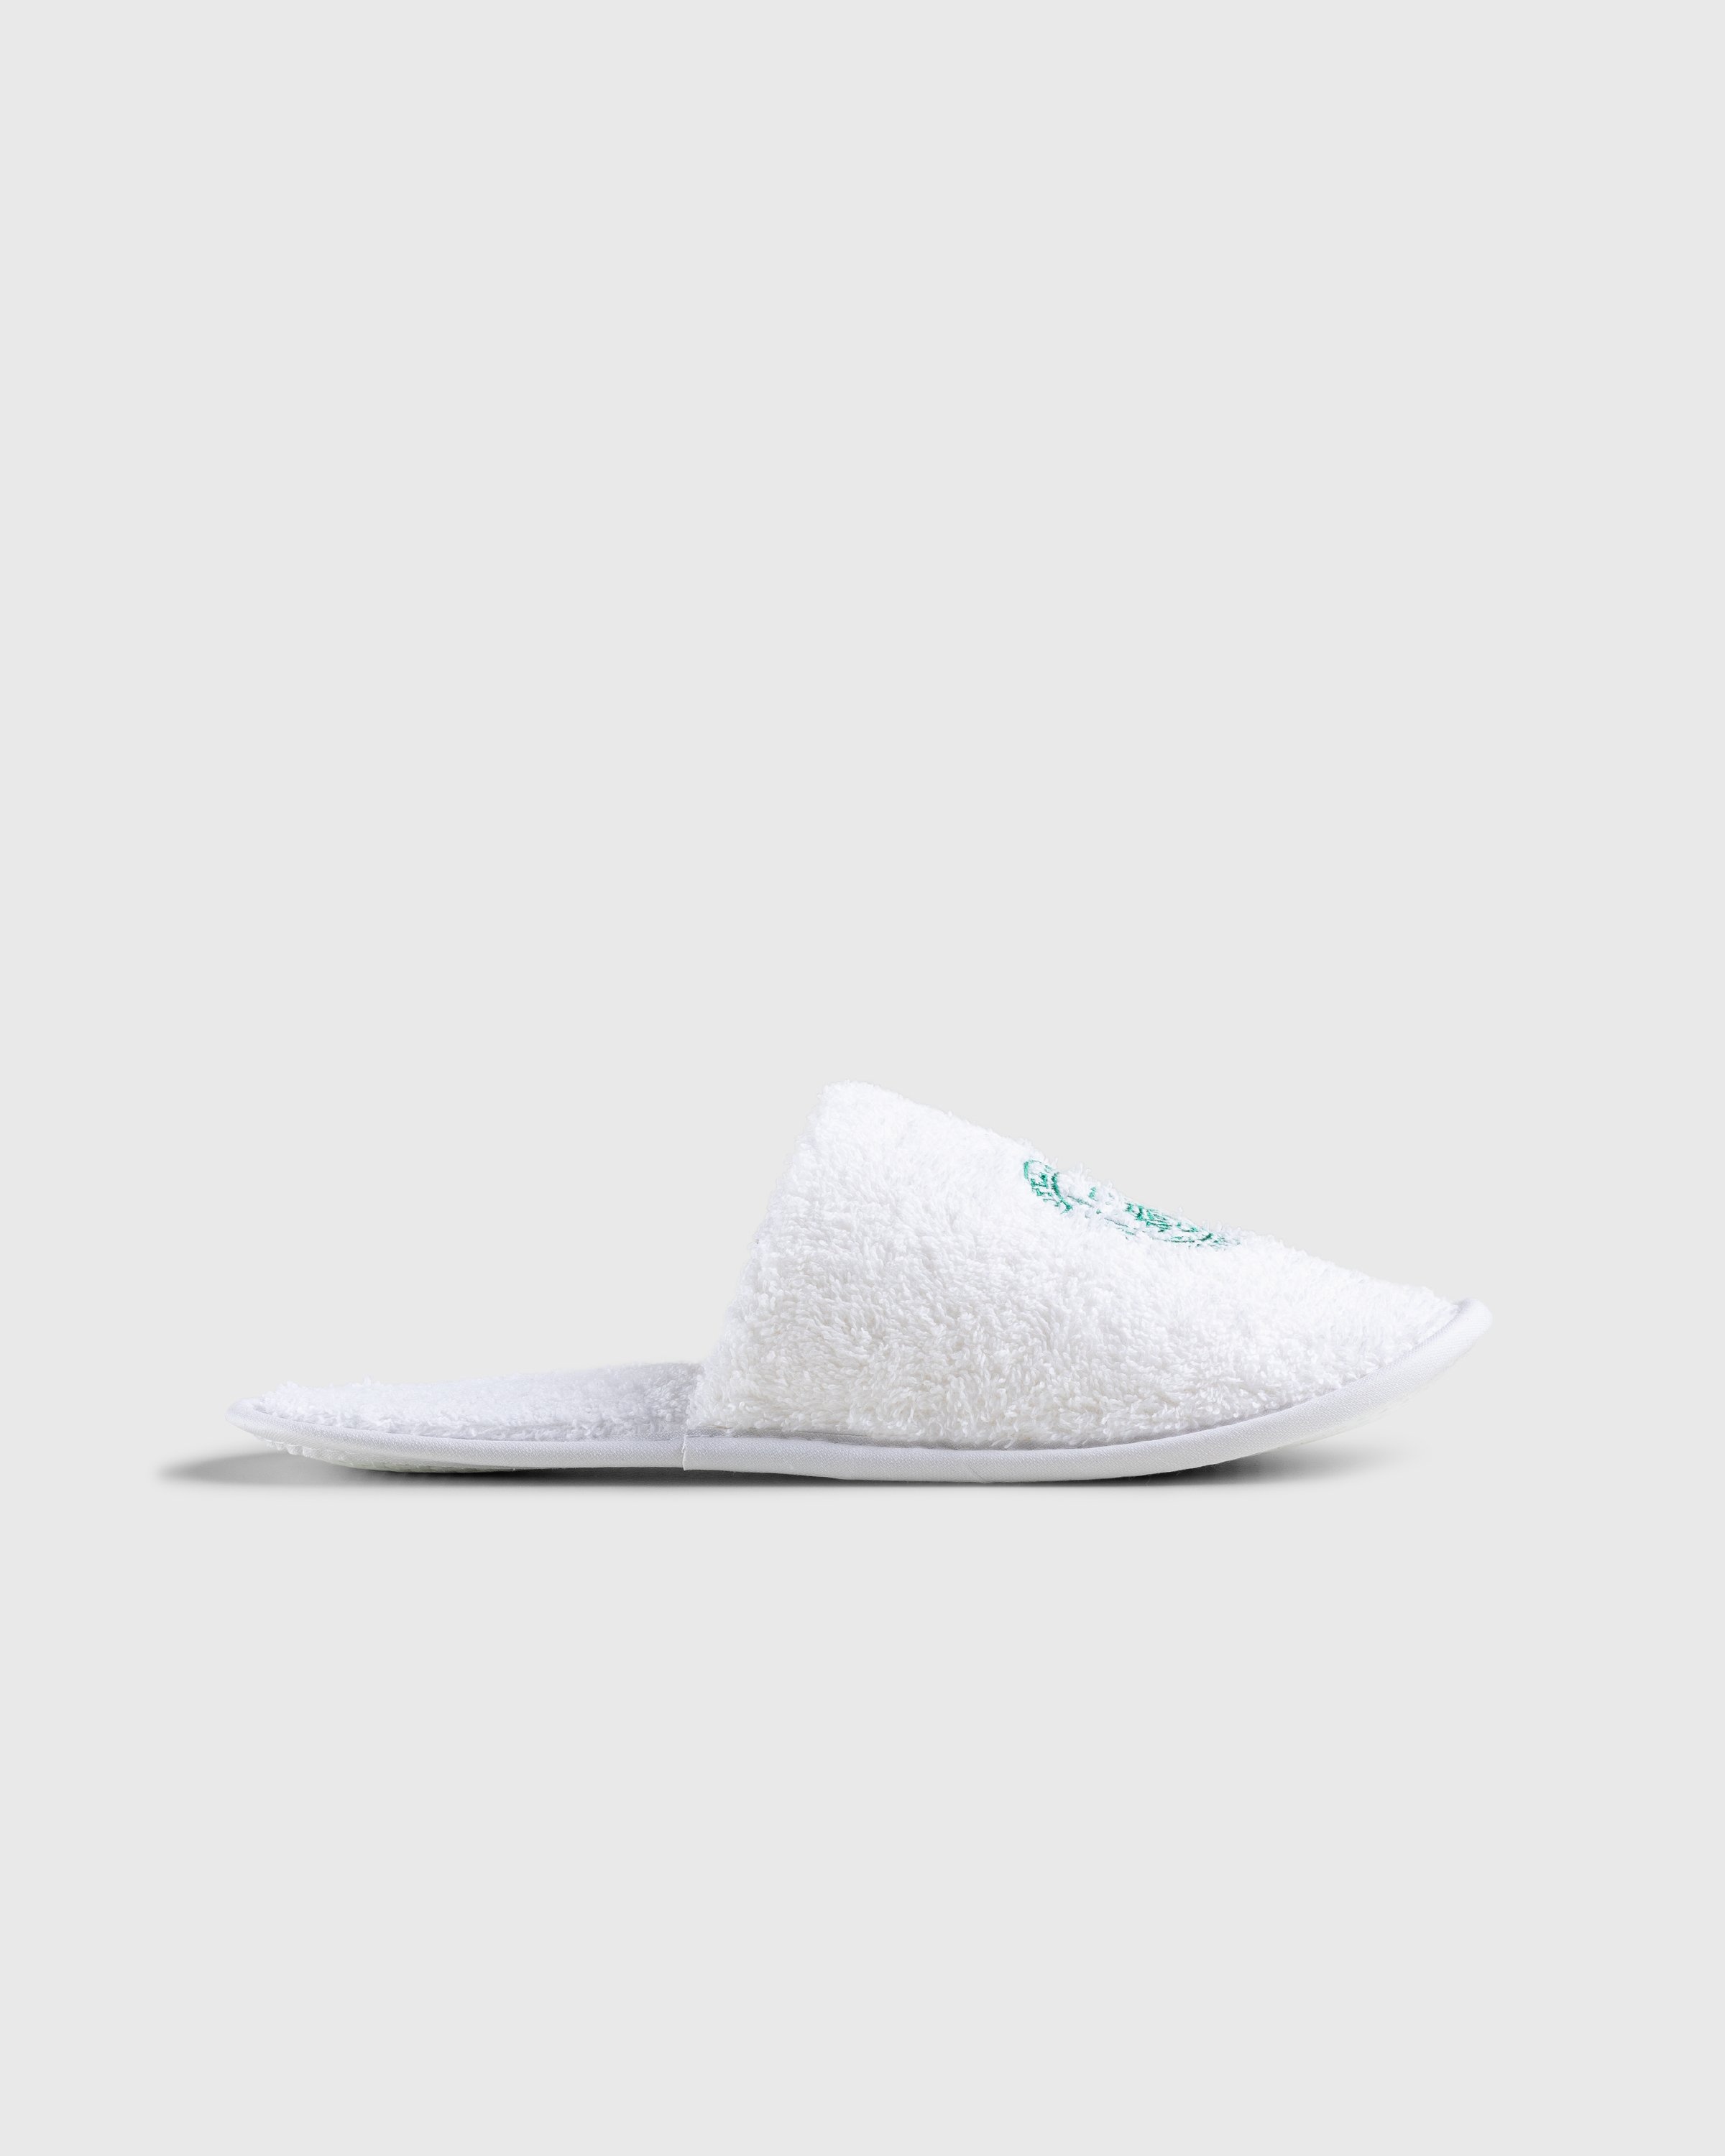 Hotel Amour x Highsnobiety – Not In Paris 4 Slippers White - Sandals - White - Image 2